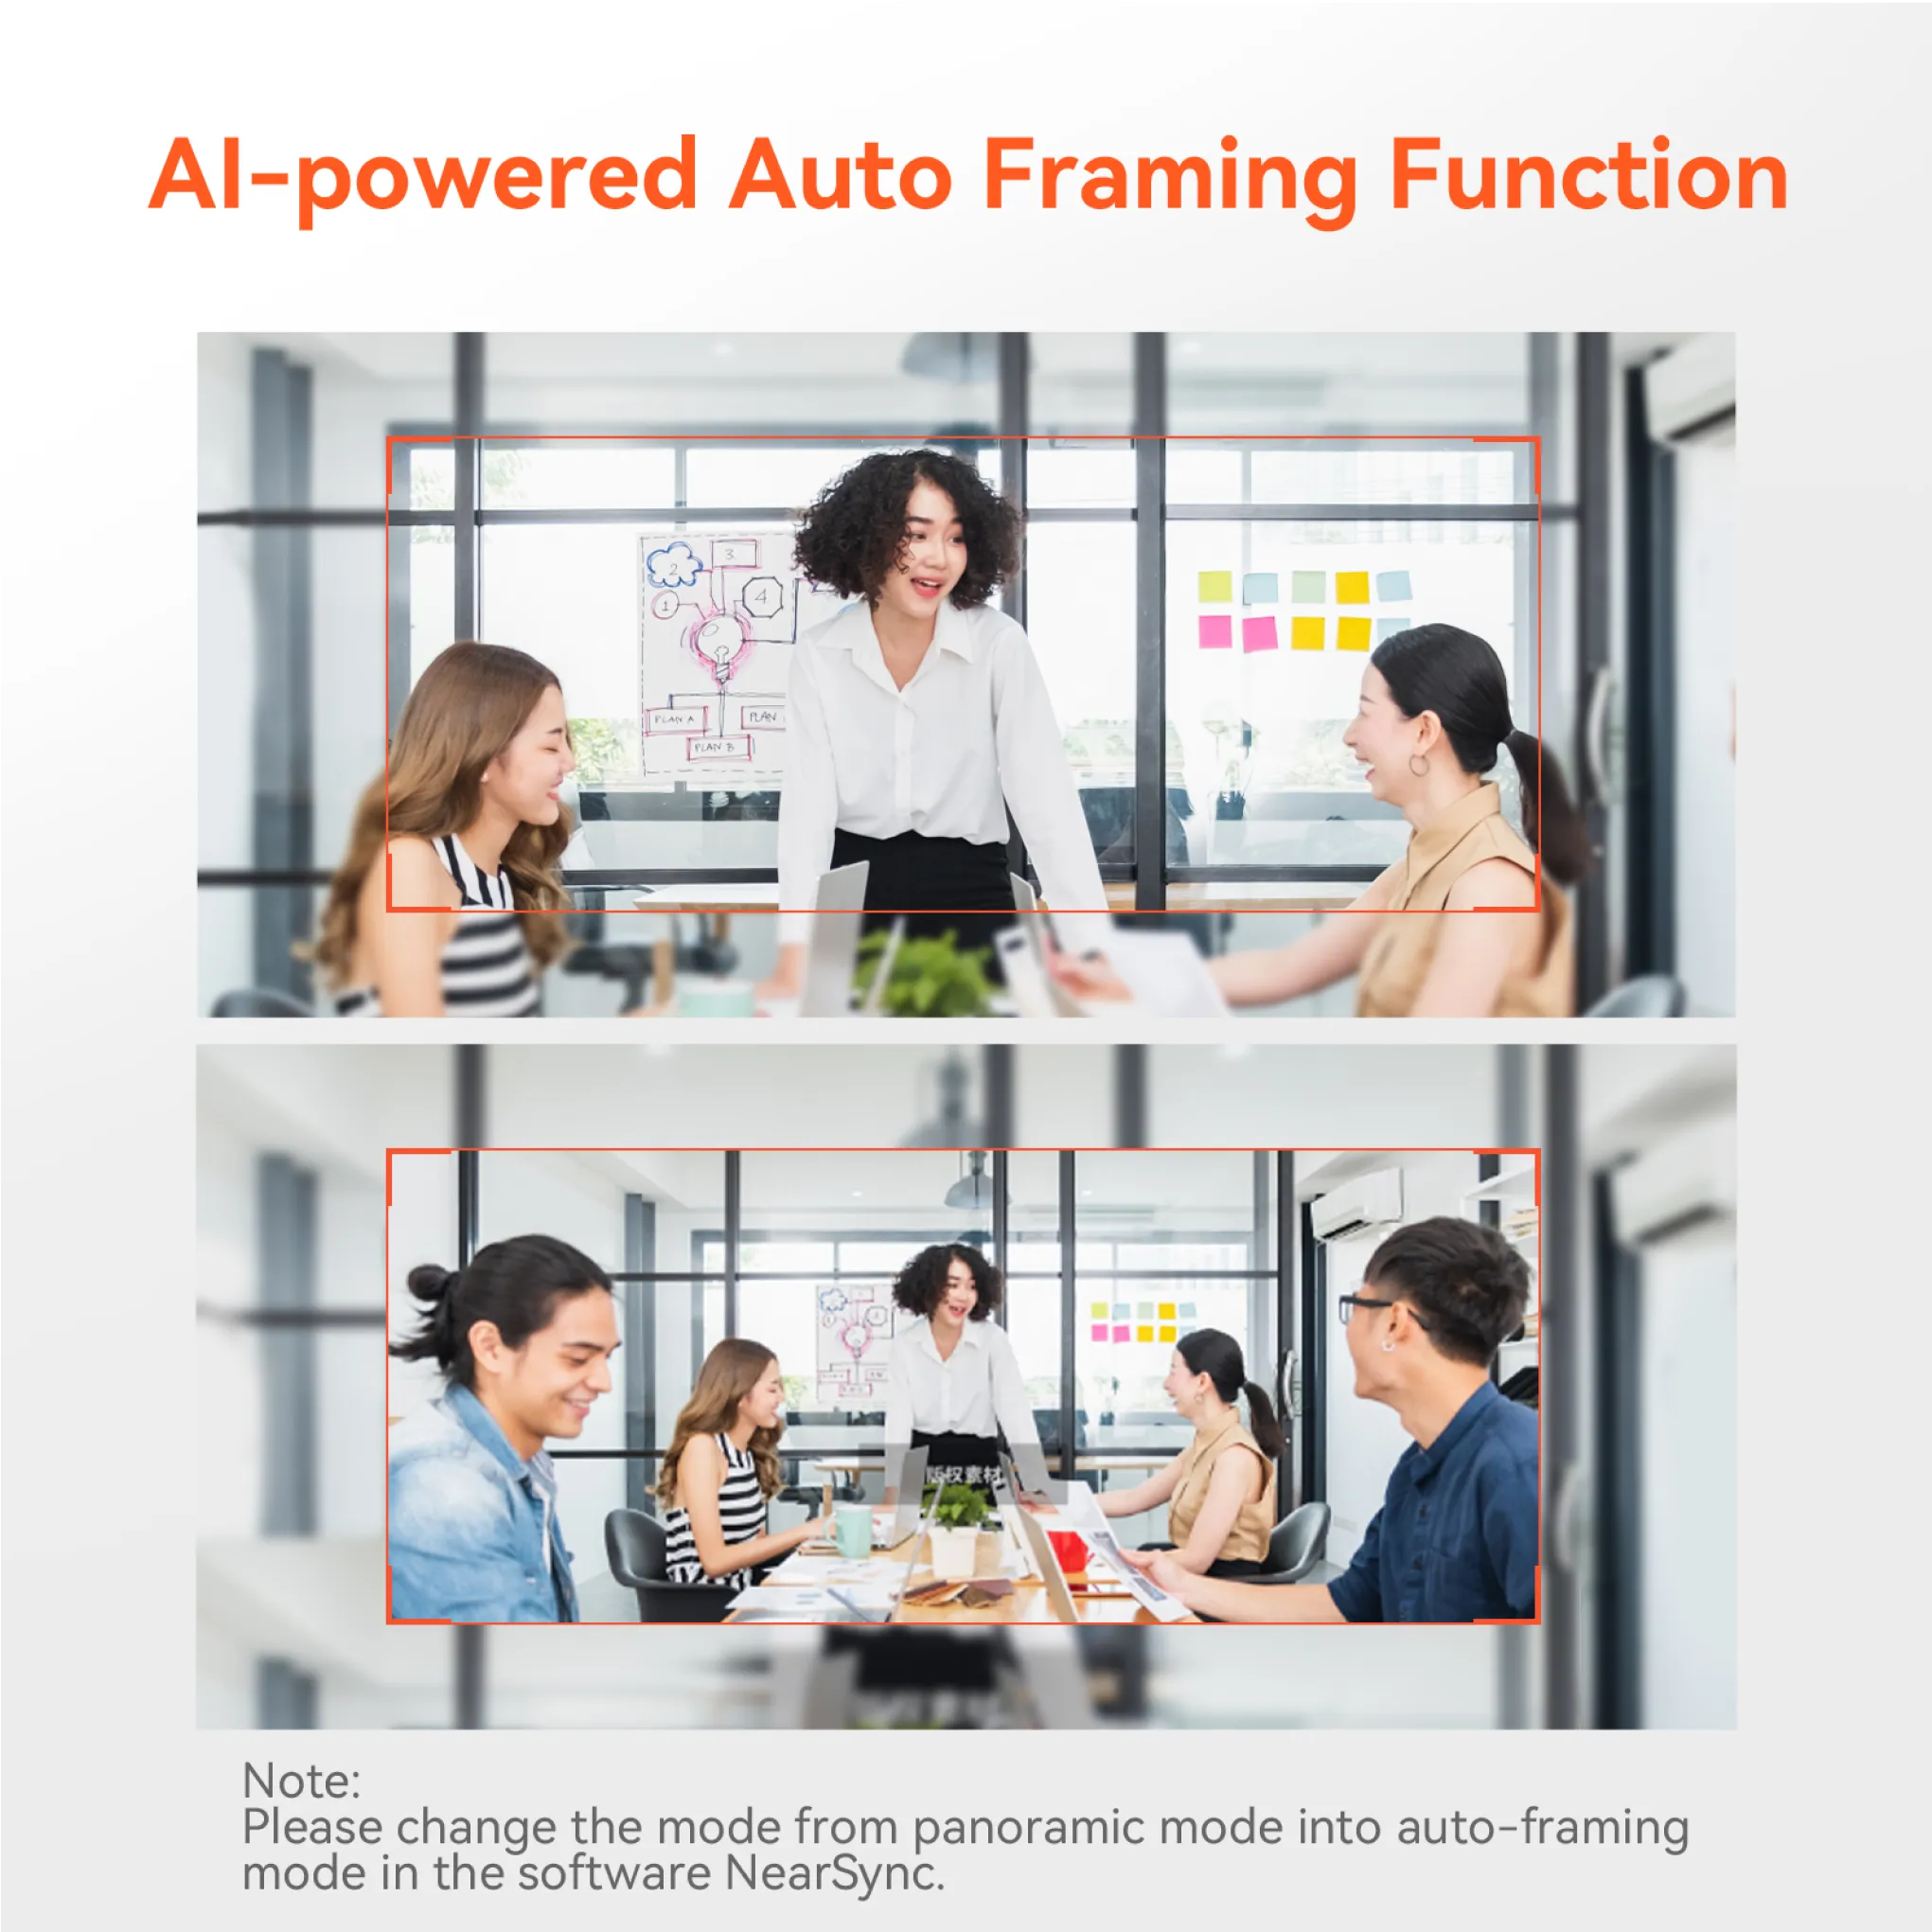 AI-powered auto framing function